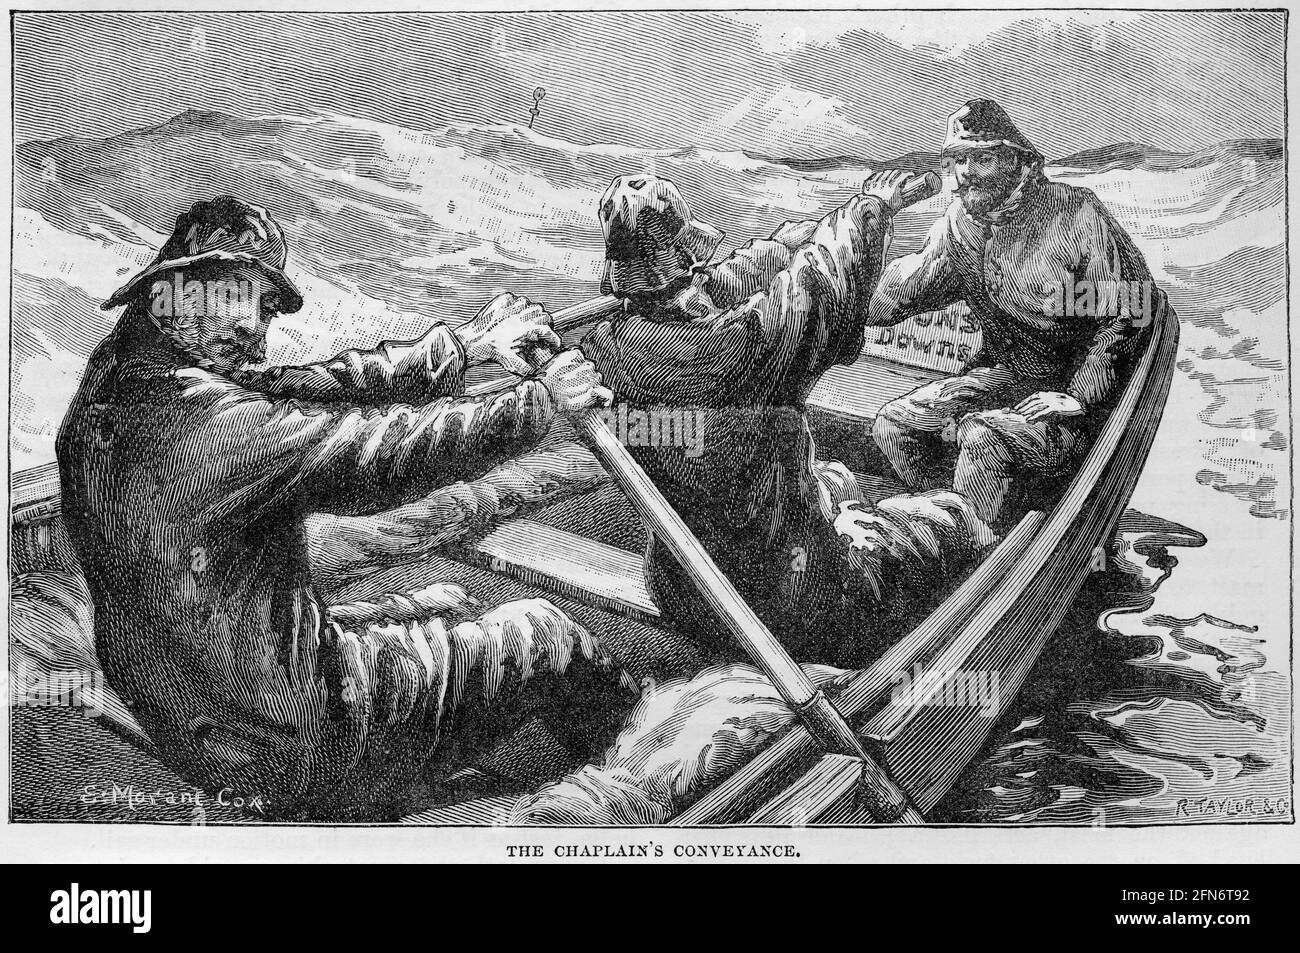 Engraving of three men in wet weather gear rowing a longboat out to a ship off the coast of England, as part of the mission to seamen, circa 1890 Stock Photo